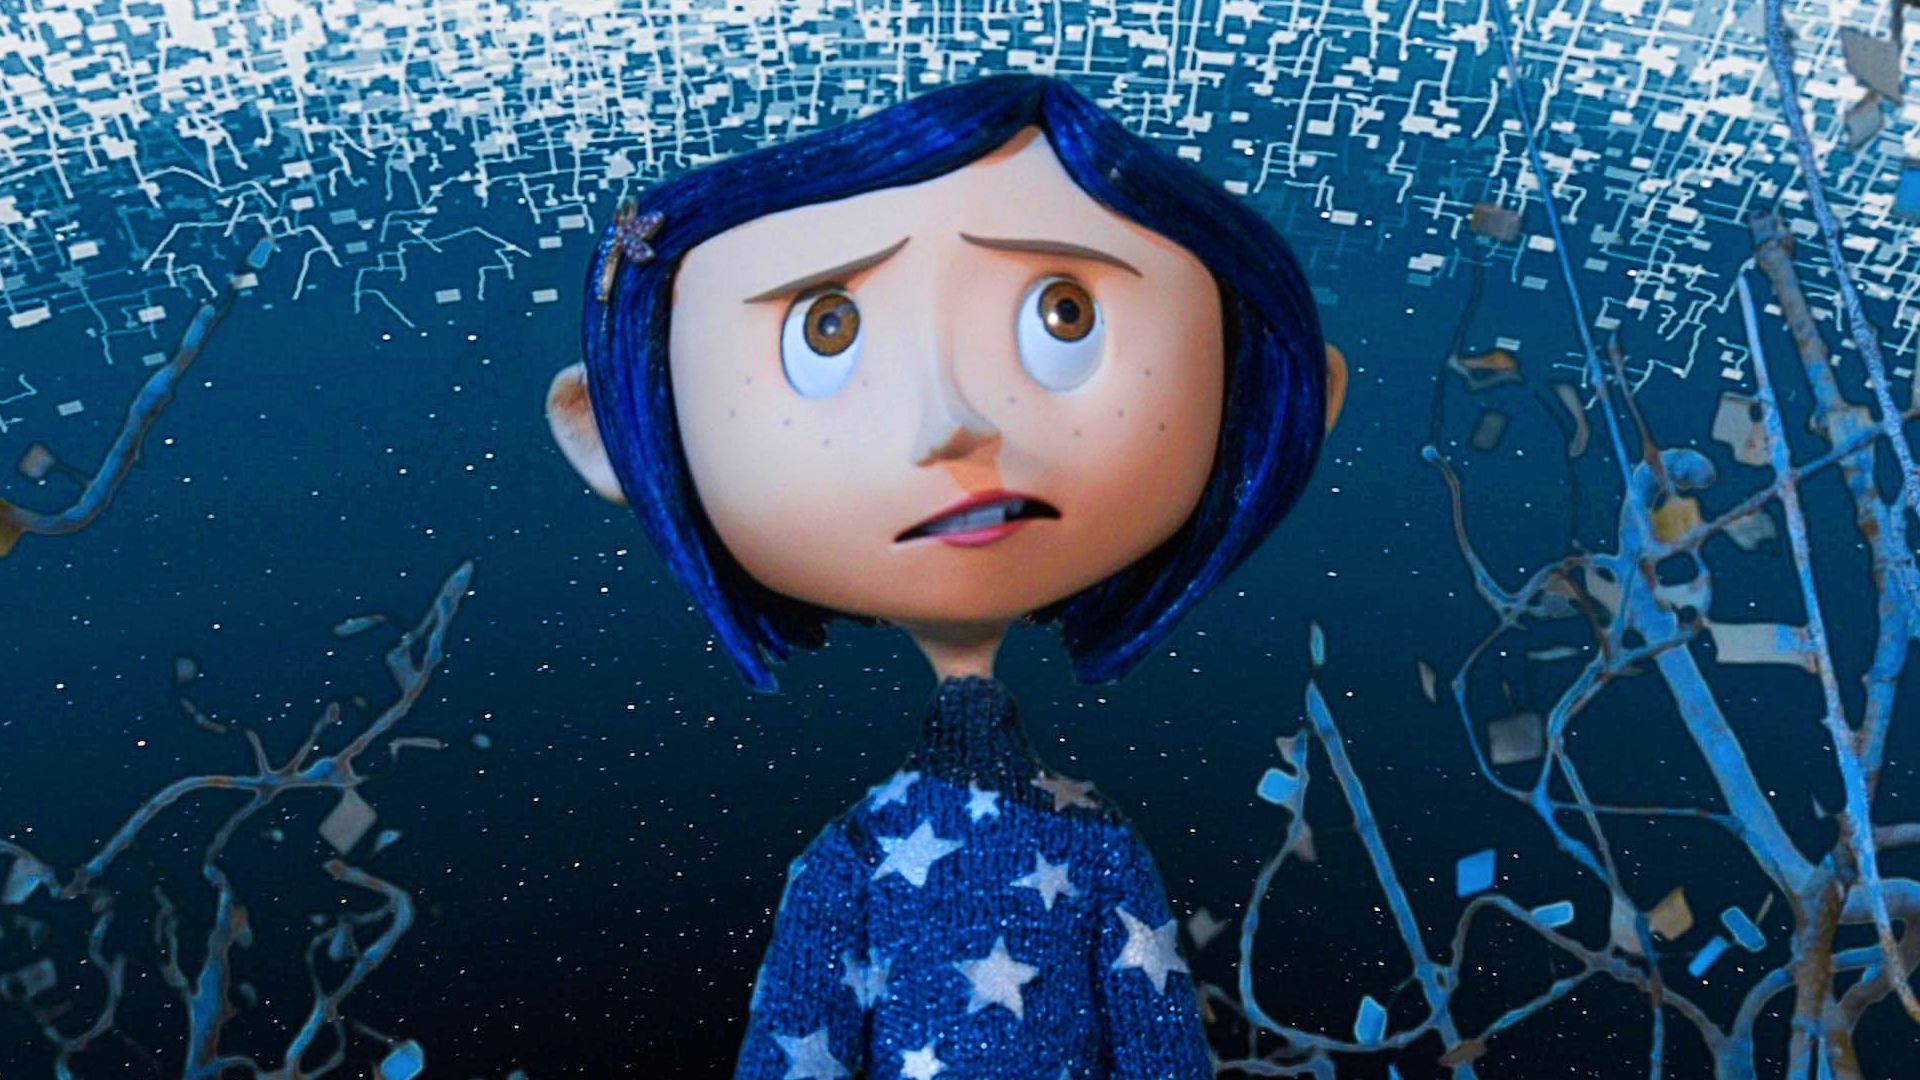 Is There Any Truth To Coraline 2 Release Date Rumors?